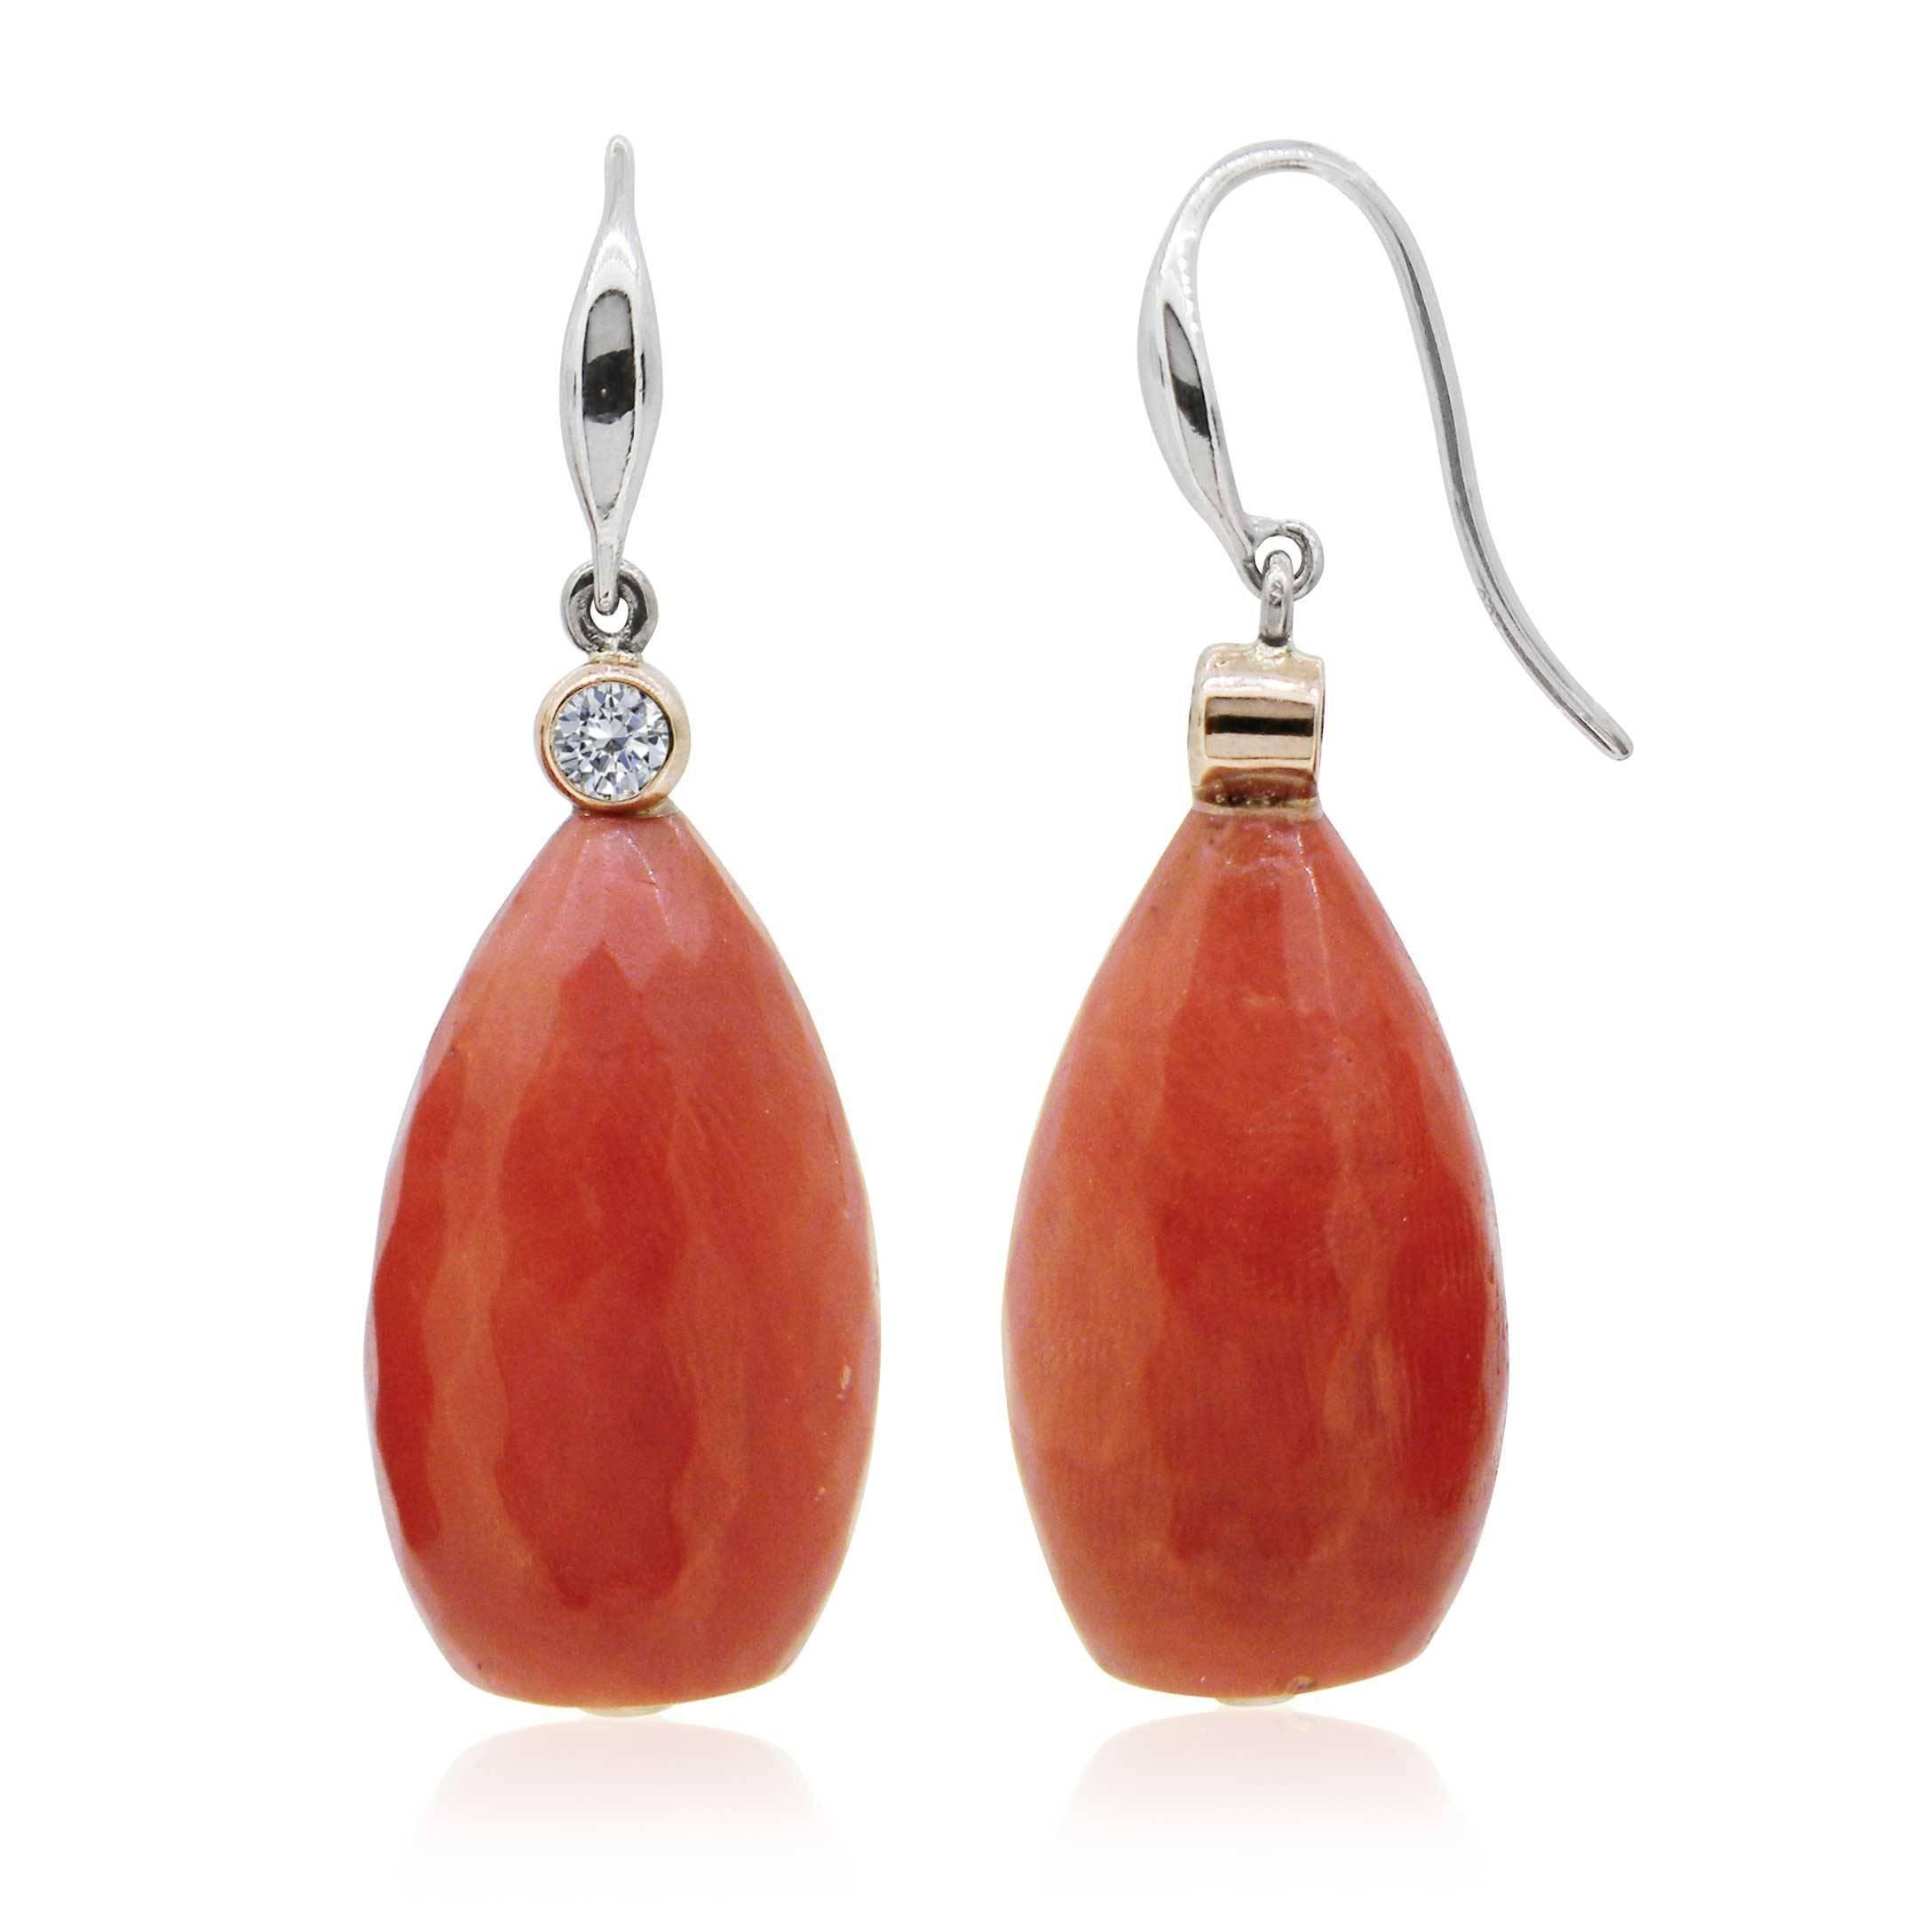 This beautiful pair of Antique coral bead earrings, with lovely subtlety faceting, has been remodelled with modern diamond-set fittings to give it a modern look.

Each earring measures approximately 23x13mm and features 1 x round brilliant cut